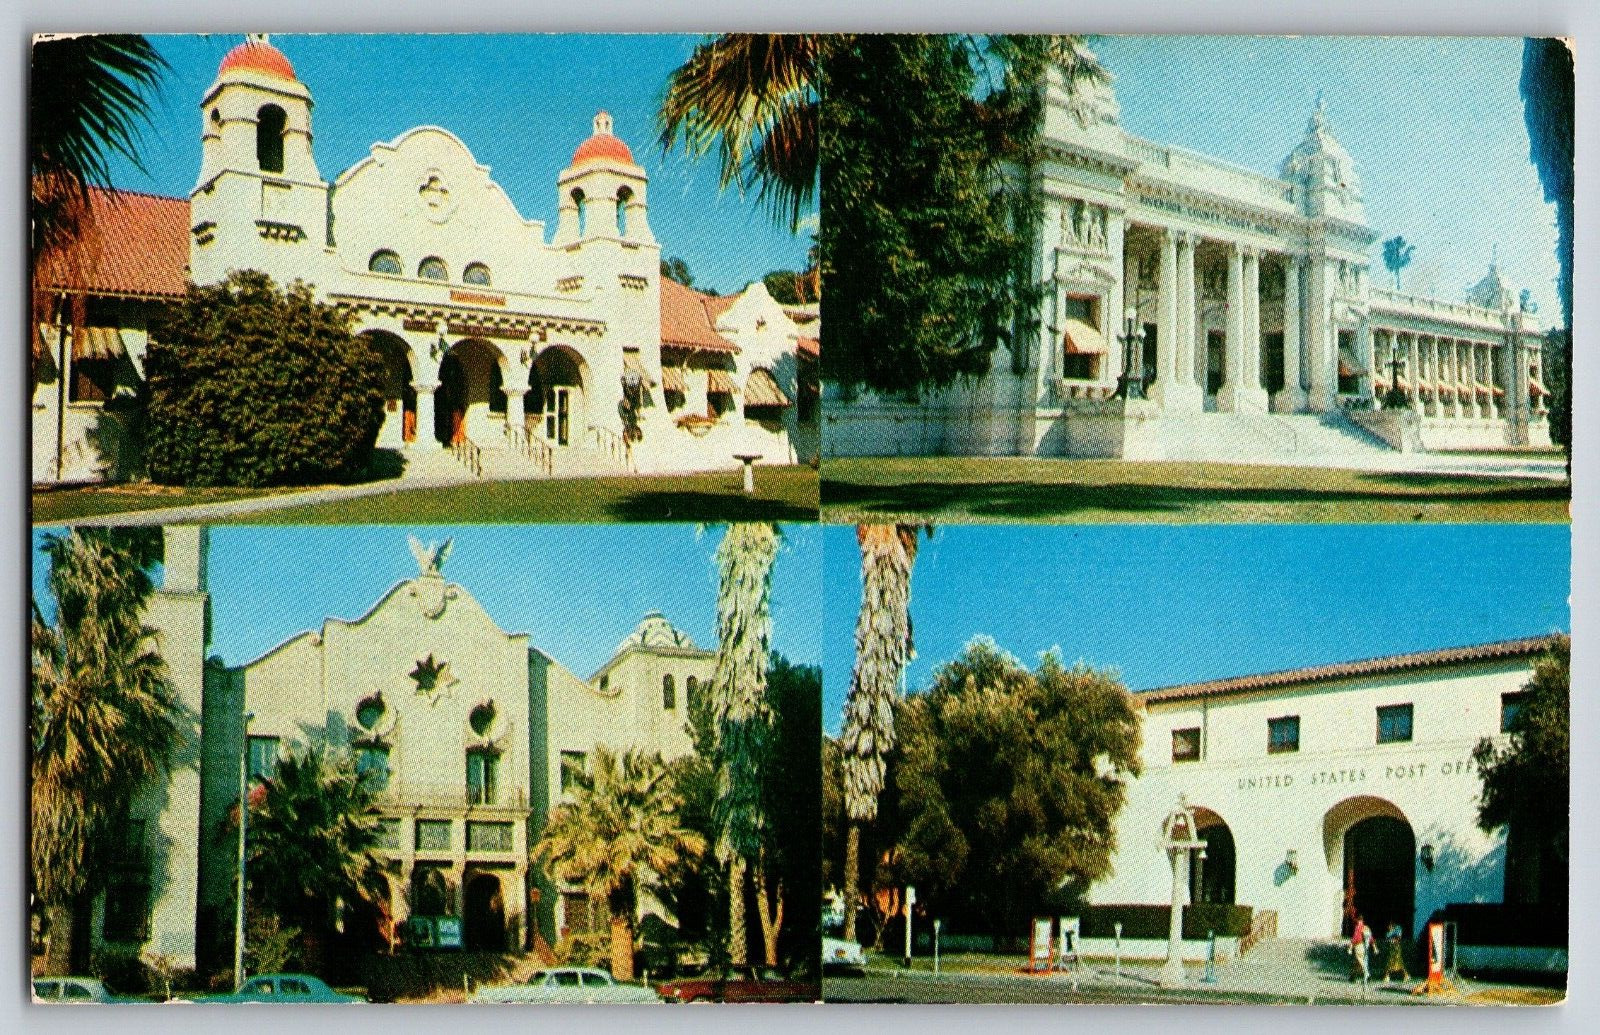 California, Riverside -  Public Library Country Court House - Vintage Postcard